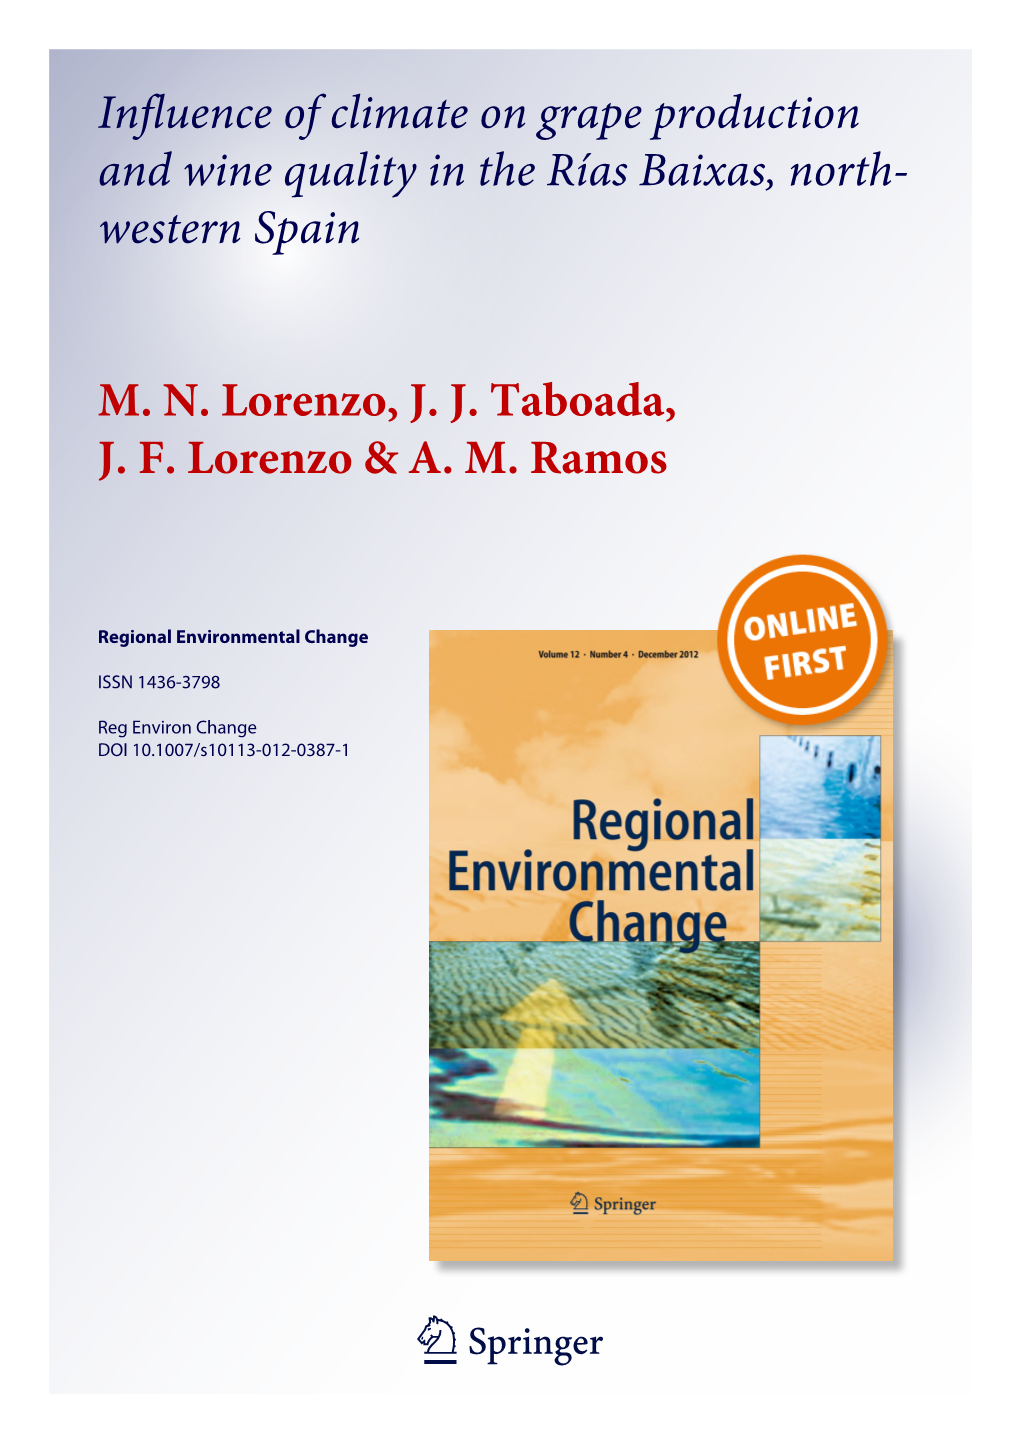 Influence of Climate on Grape Production and Wine Quality in the Rías Baixas, North- Western Spain